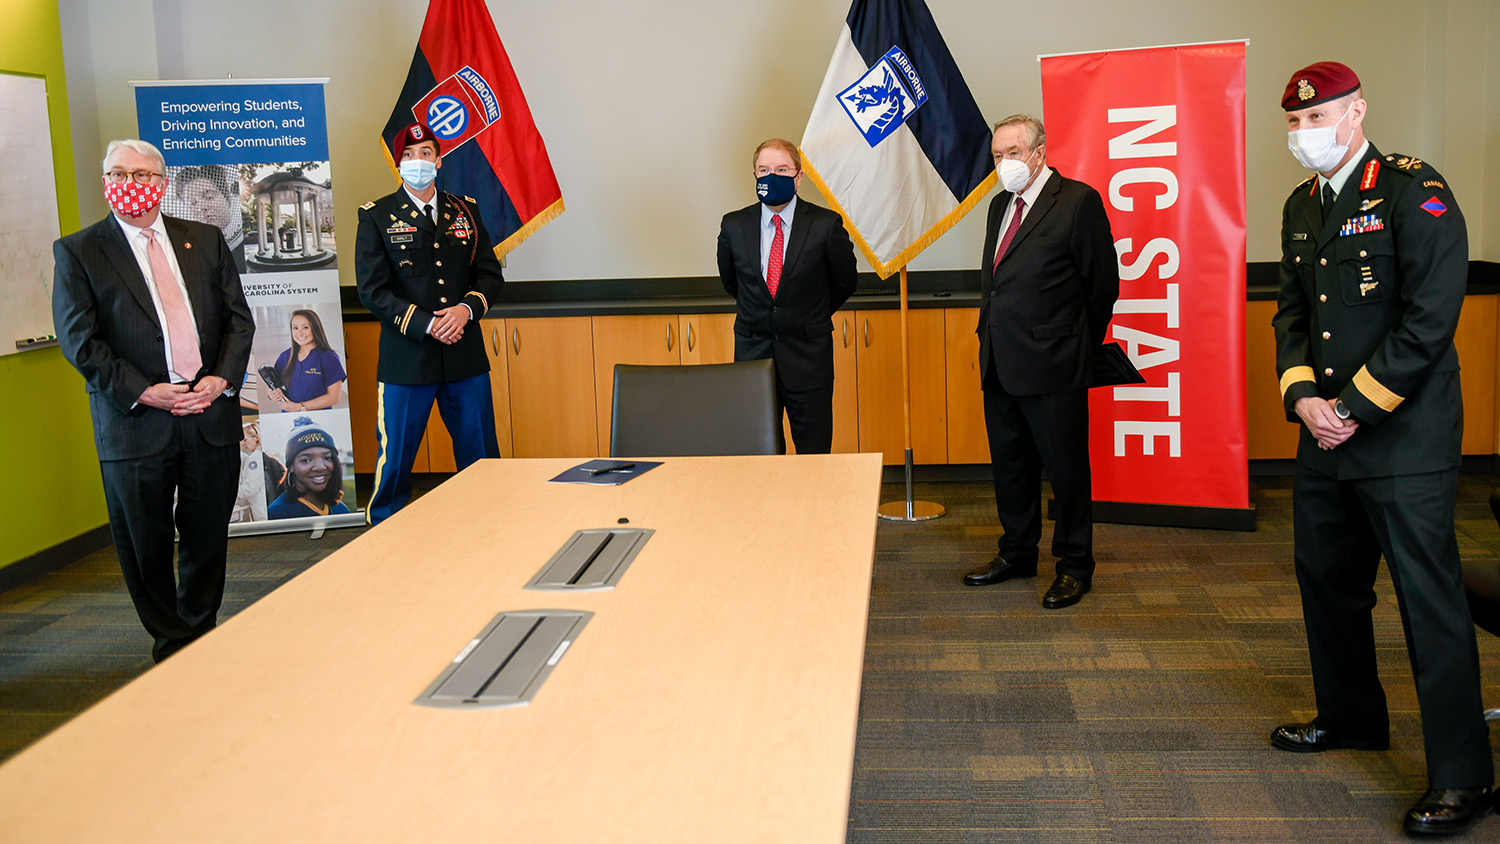 Brig. Gen. Bob Ritchie, UNC System President Peter Hans, NC State University Chancellor Randy Woodson, Vice Chancellor Mladen Vouk and Capt. Dave Giralt attend a signing event to formalize an educational partnership agreement. 